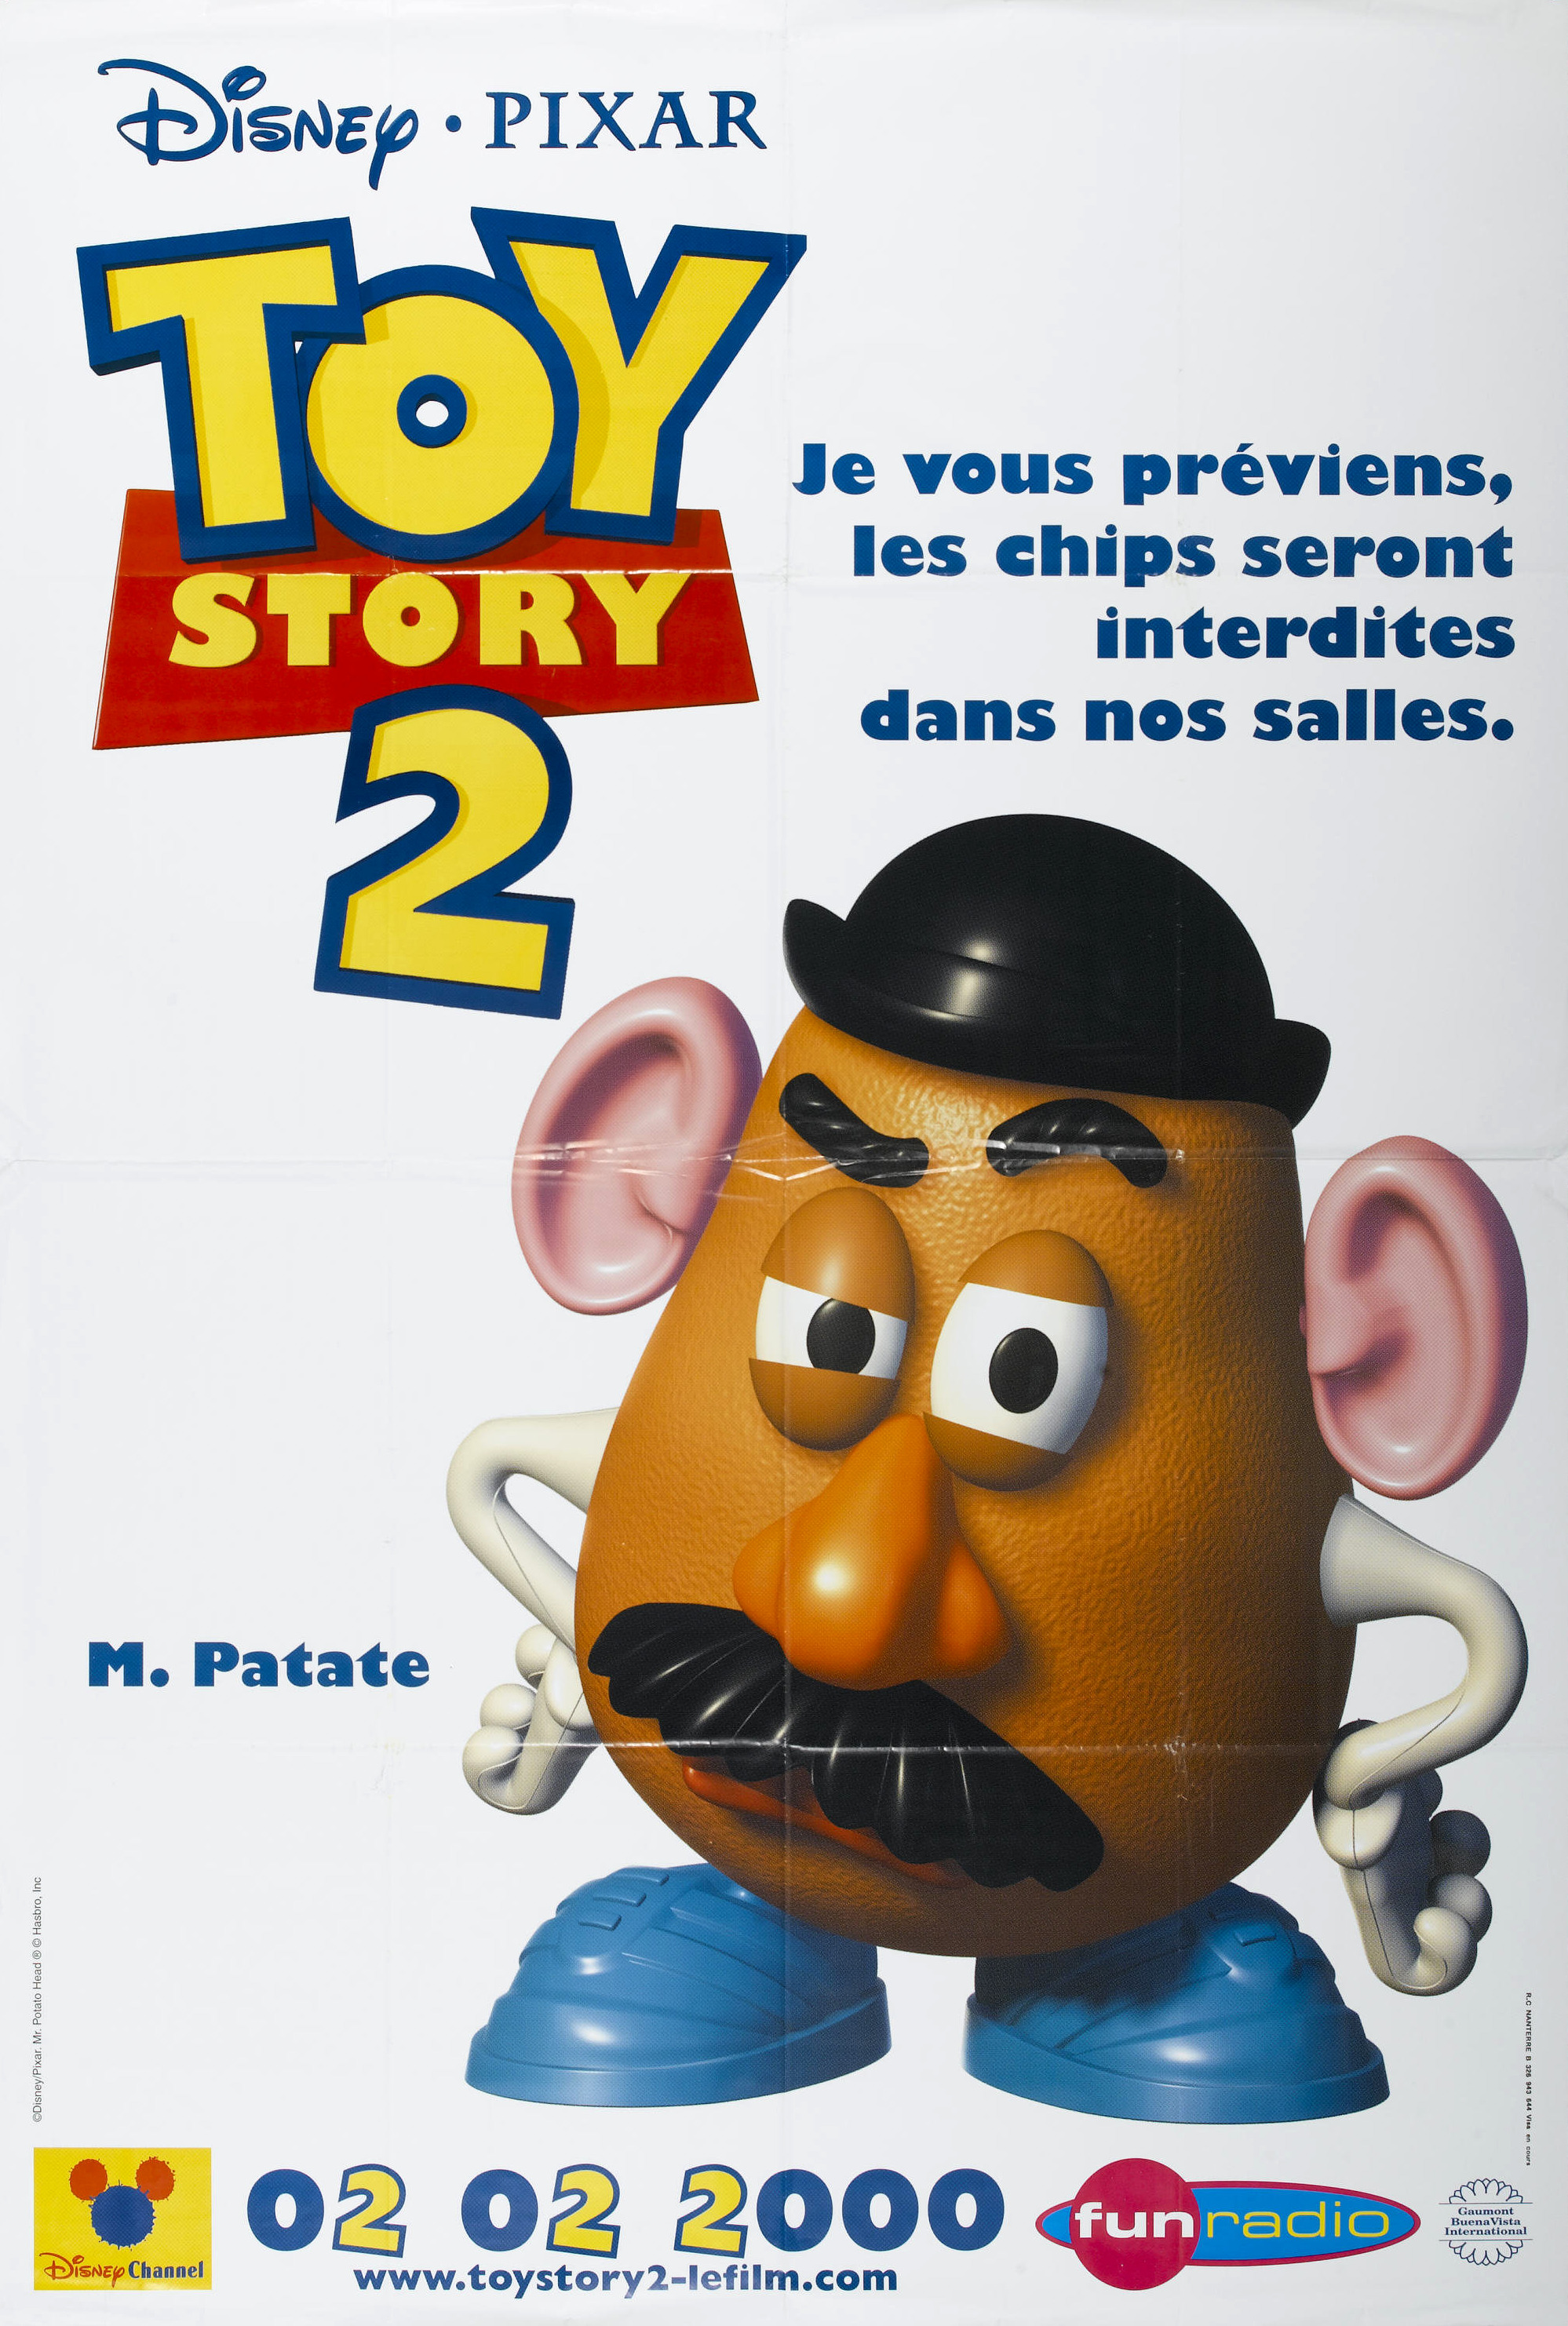 Mega Sized Movie Poster Image for Toy Story 2 (#5 of 5)